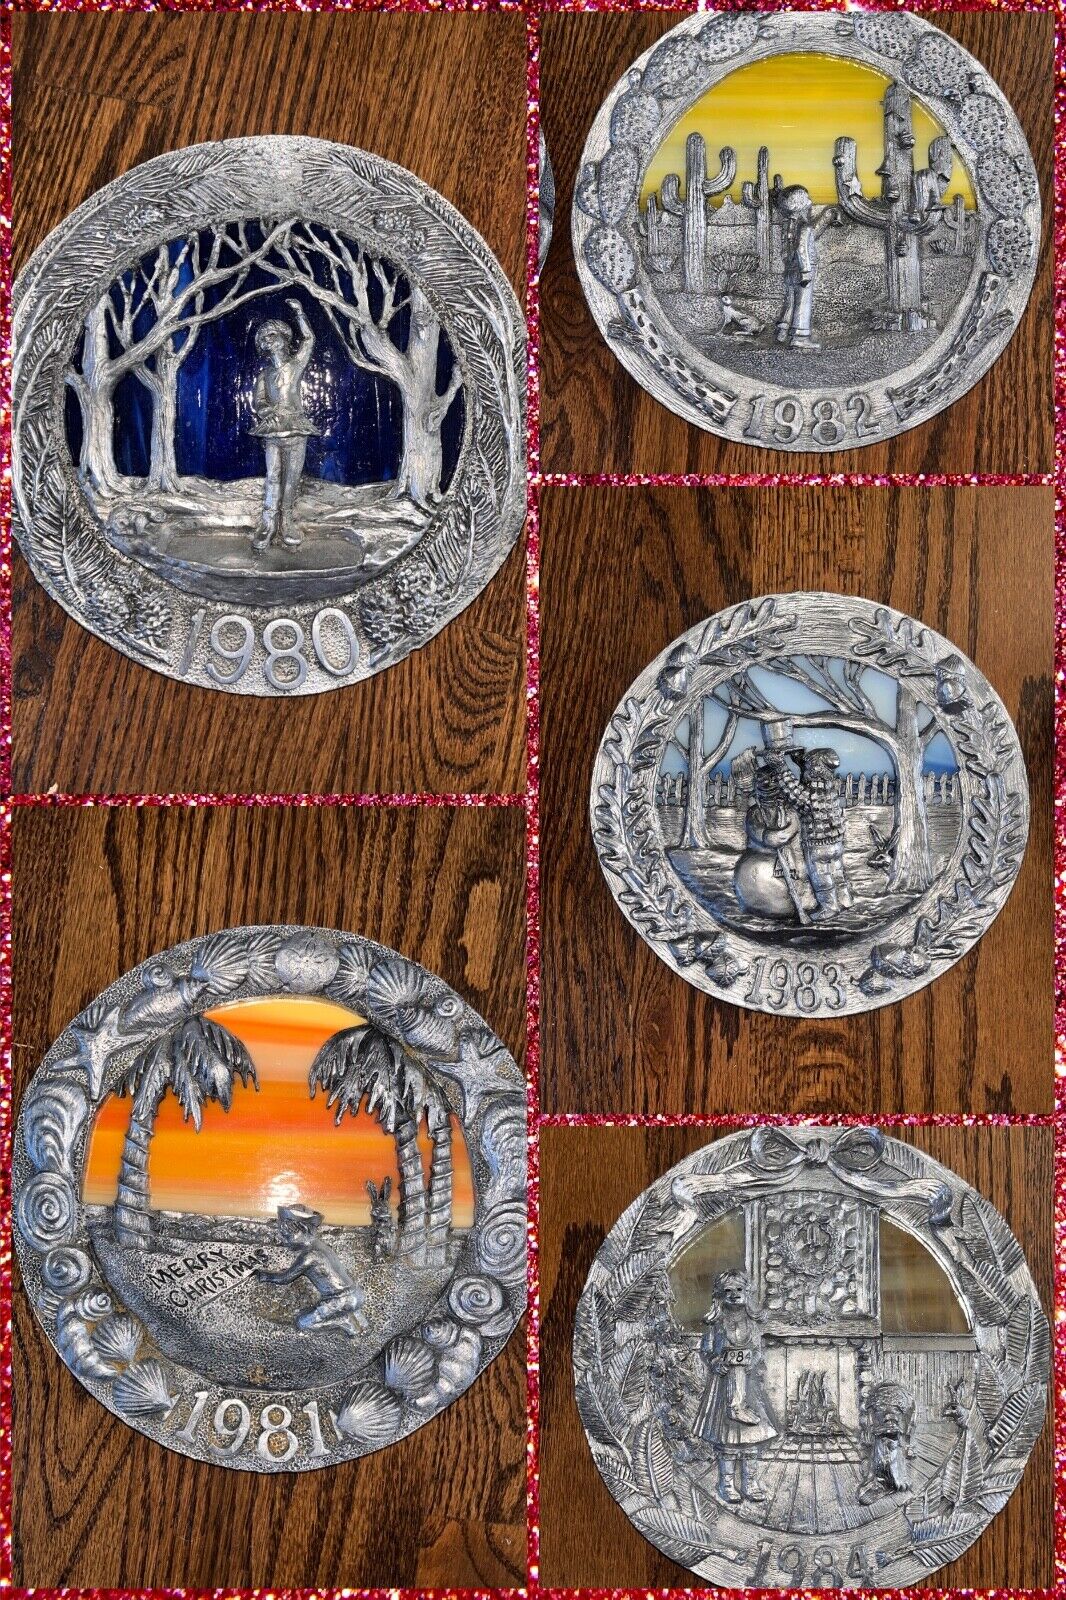 LOT OF 5 Michael Ricker Signed Pewter & Glass Christmas Plates 1980-1985